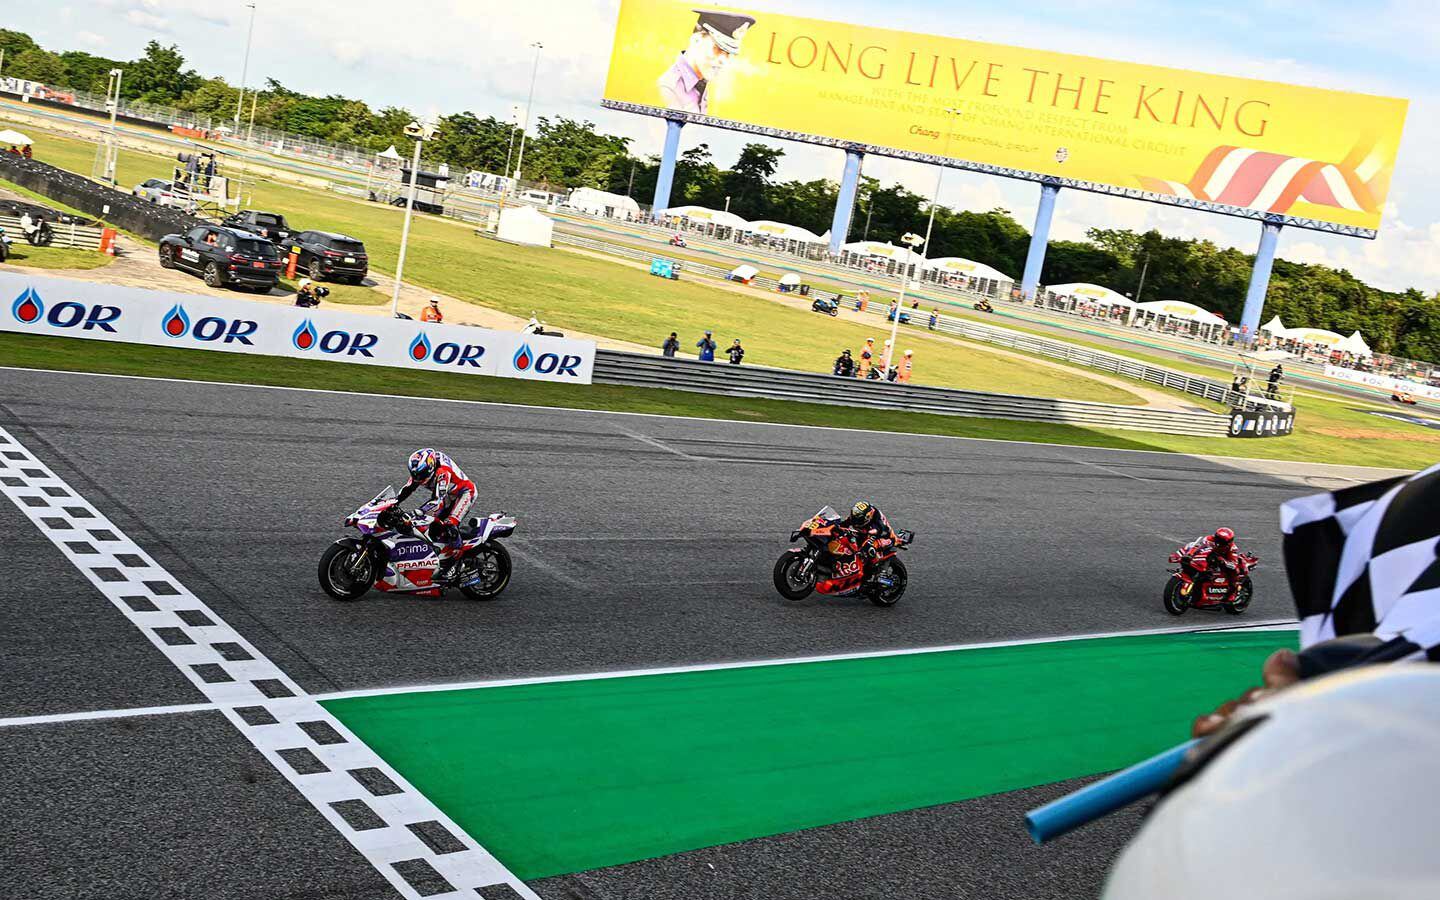 Buriram was one of the closest races of the year.